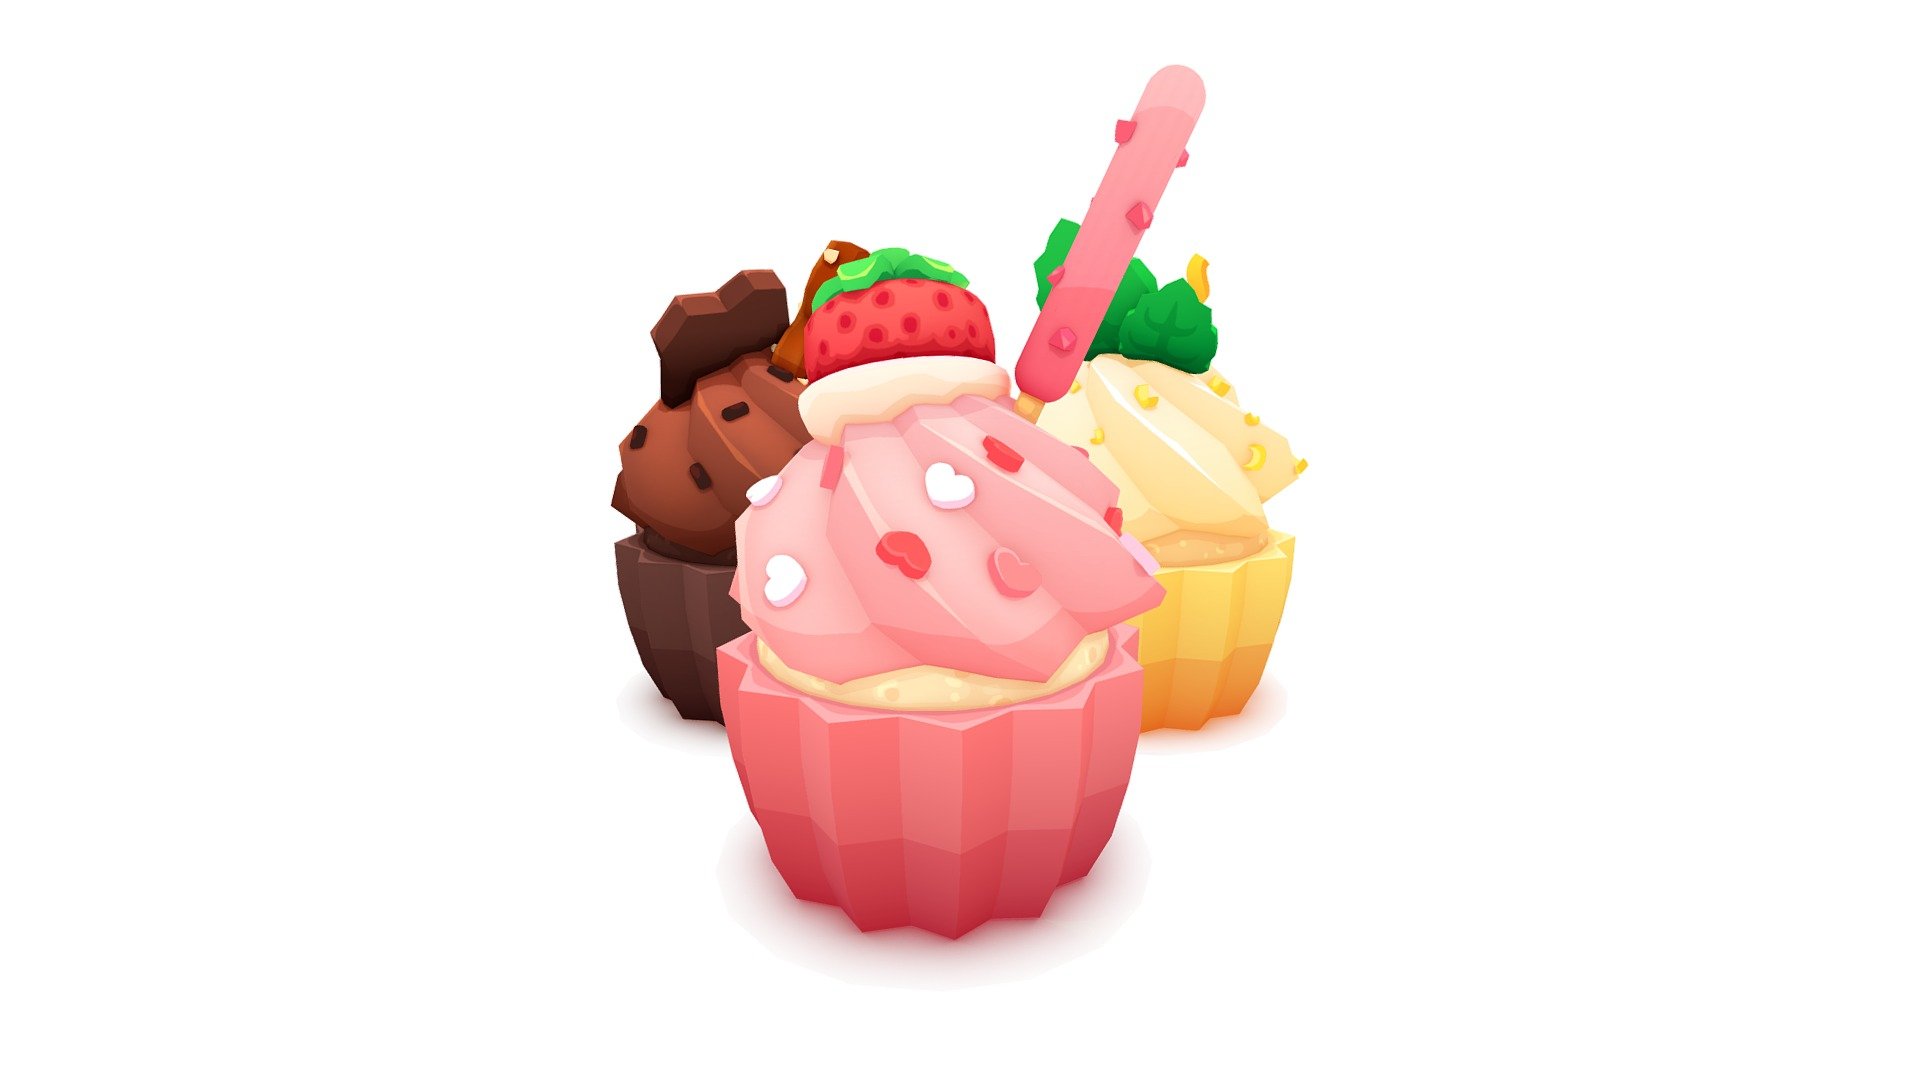 Strawberry, Chocolate and Lemon Cupcakes
Modelled in 3dsmax, painted in Substance Painter 3d model